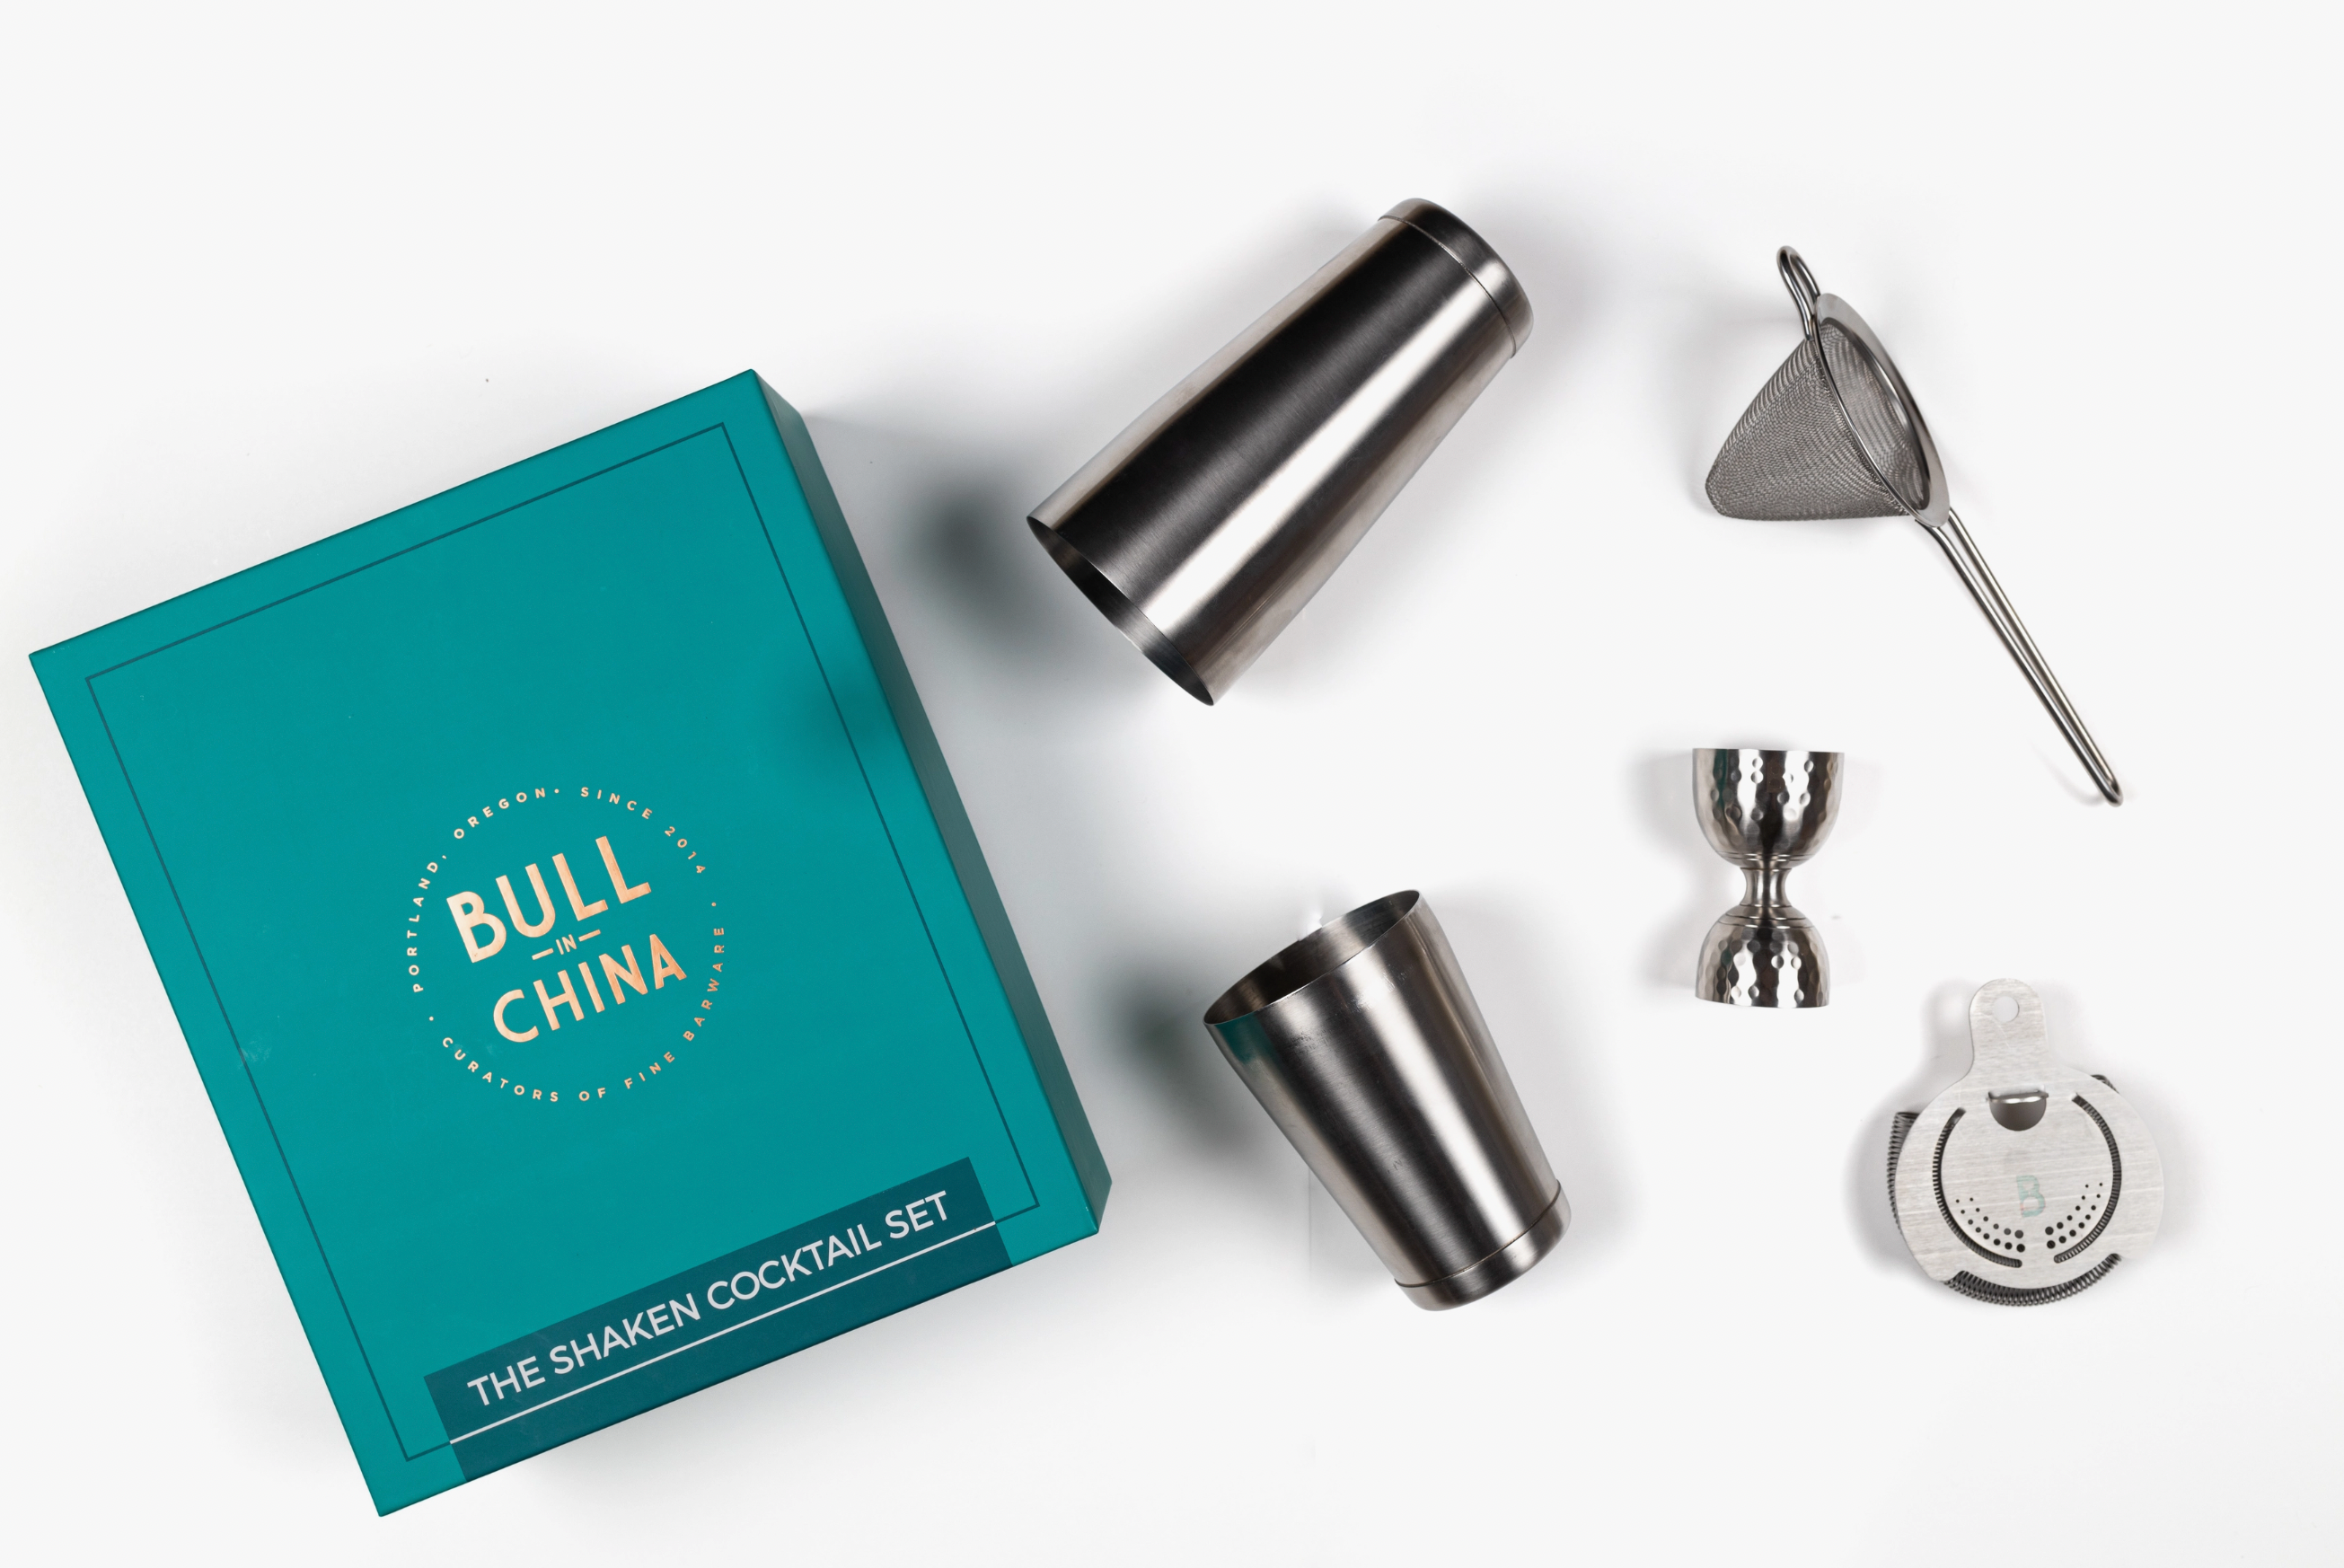 Premium Weighted Bar Cocktail Shaker Set - Bull In China